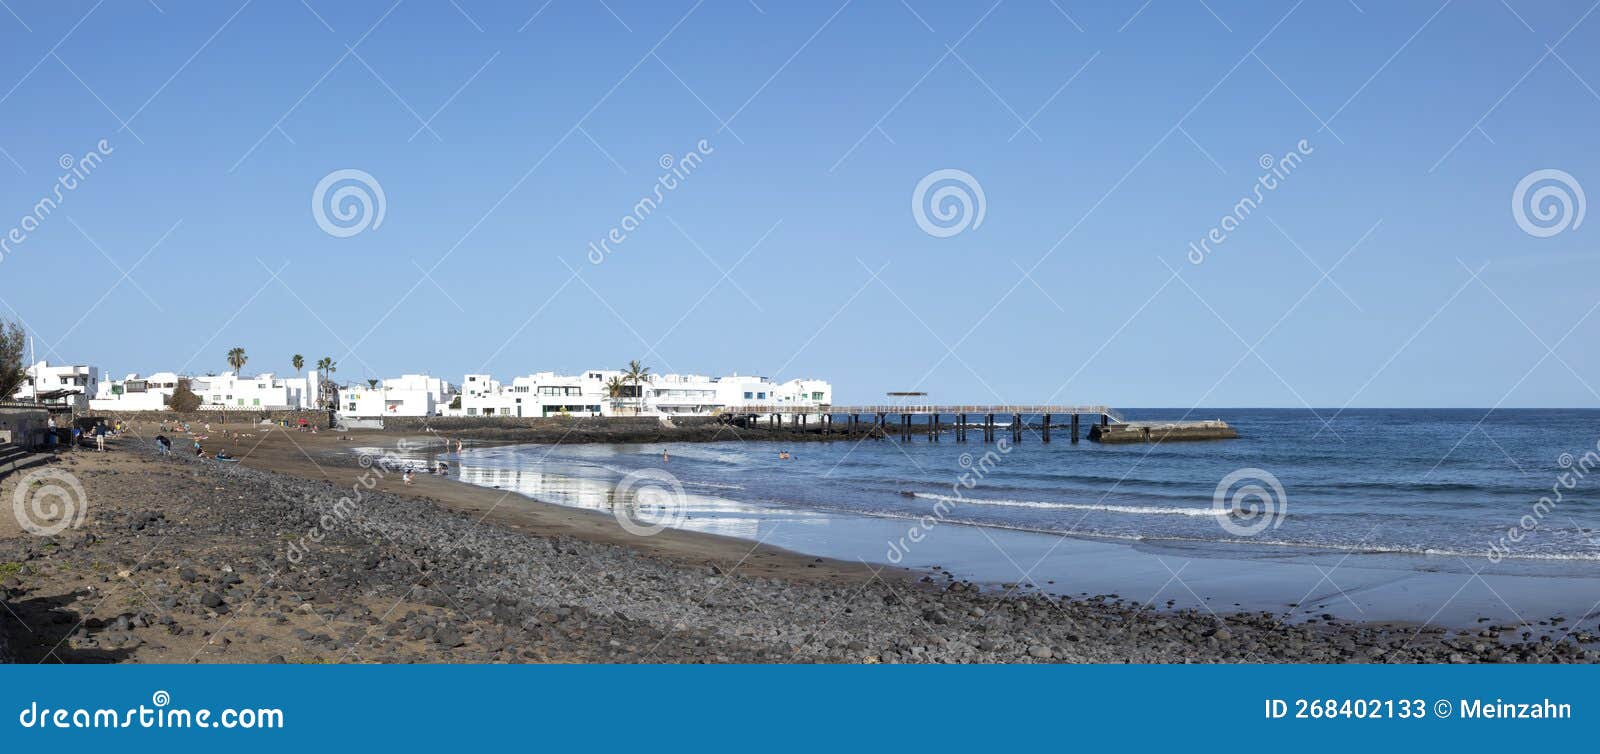 scenic beach in arrieta, island of lanzarote at canary isles